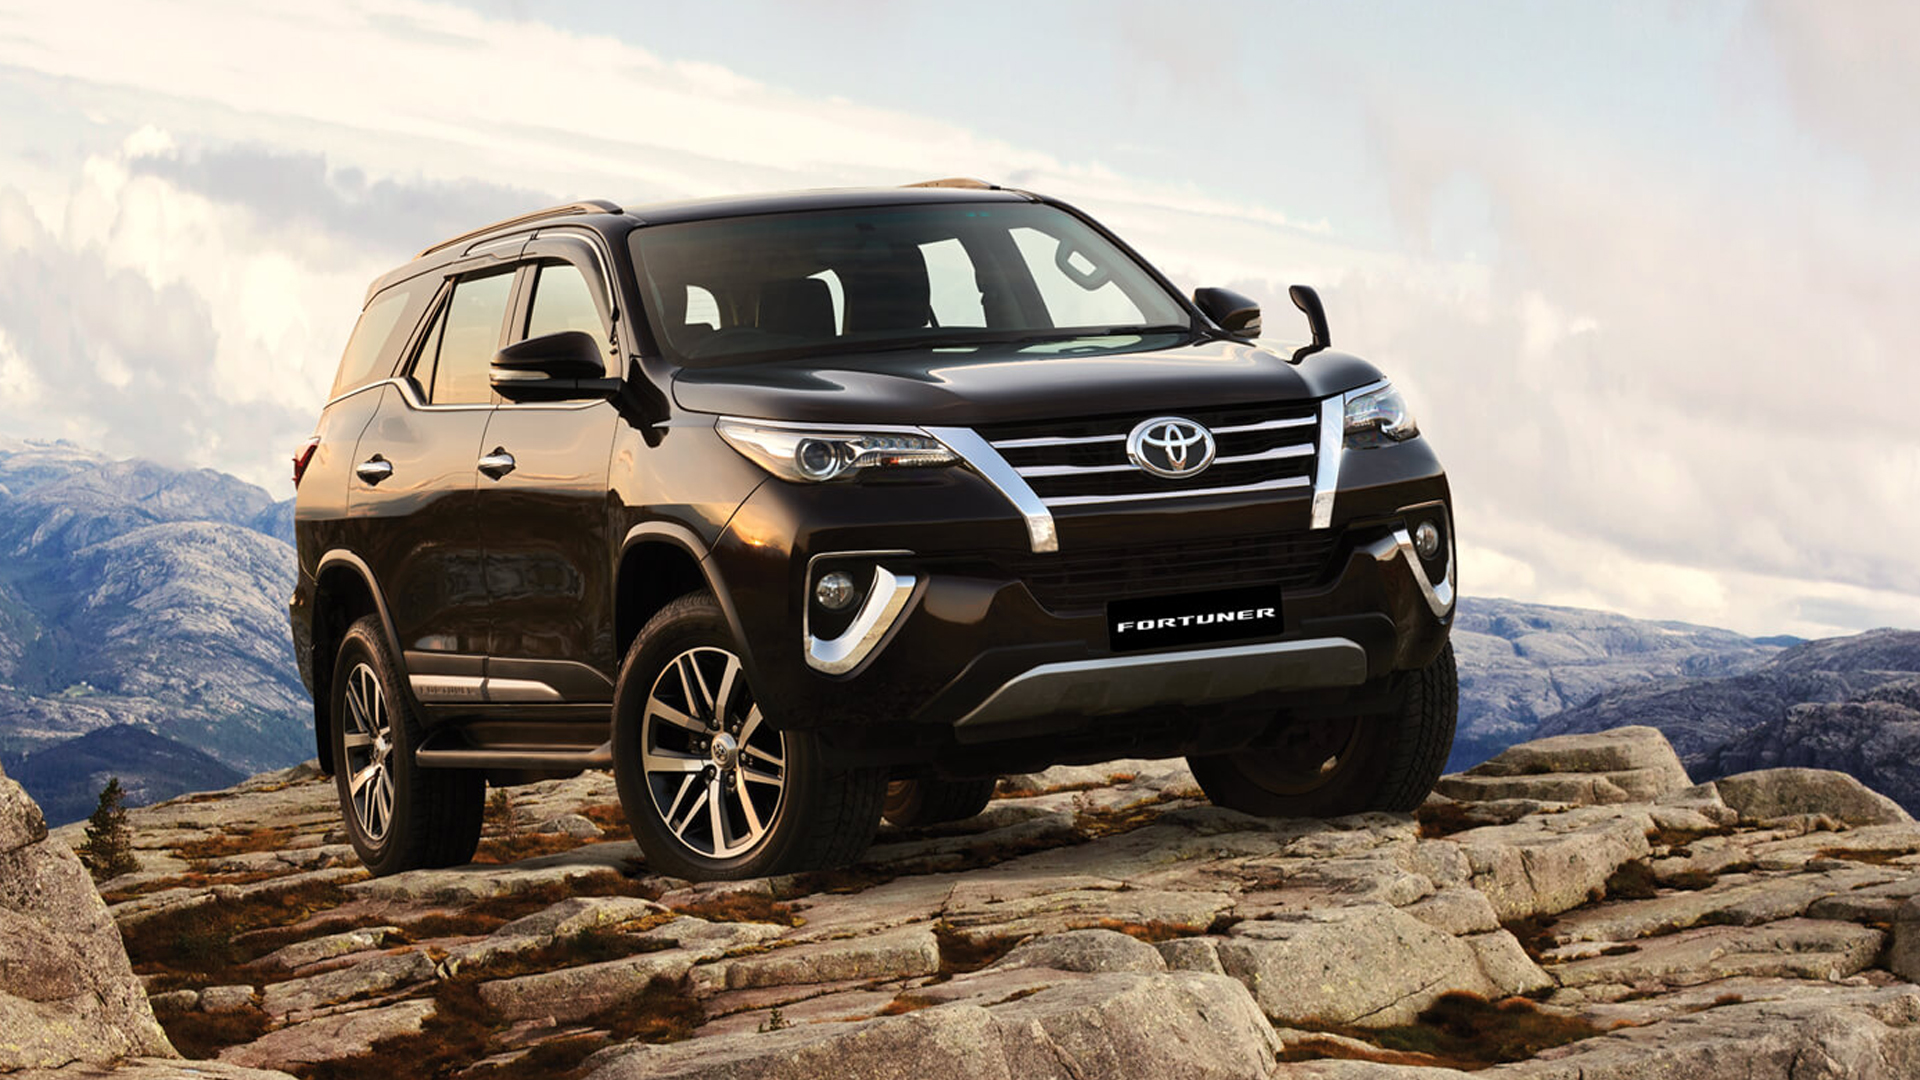 Toyota Fortuner Hd Wallpaper For Mobile